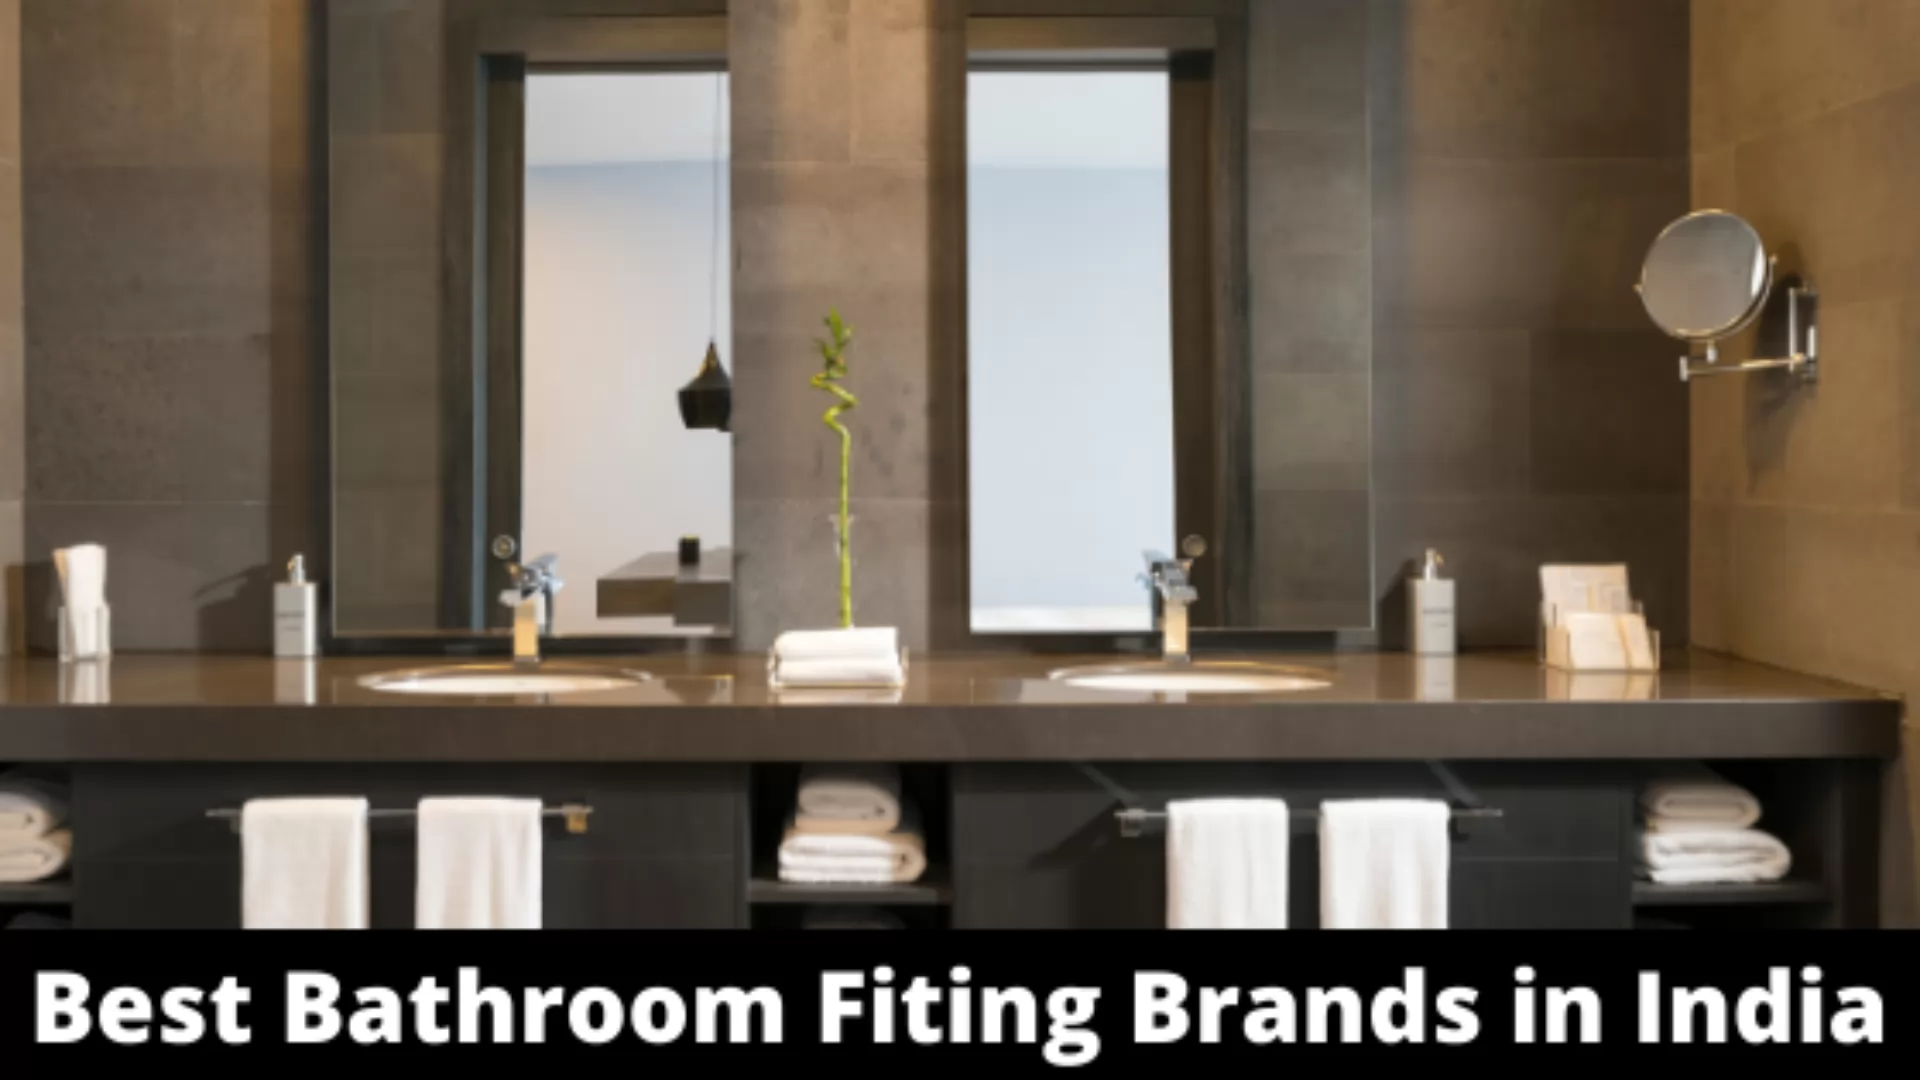  Bathroom Fitting Brands in India